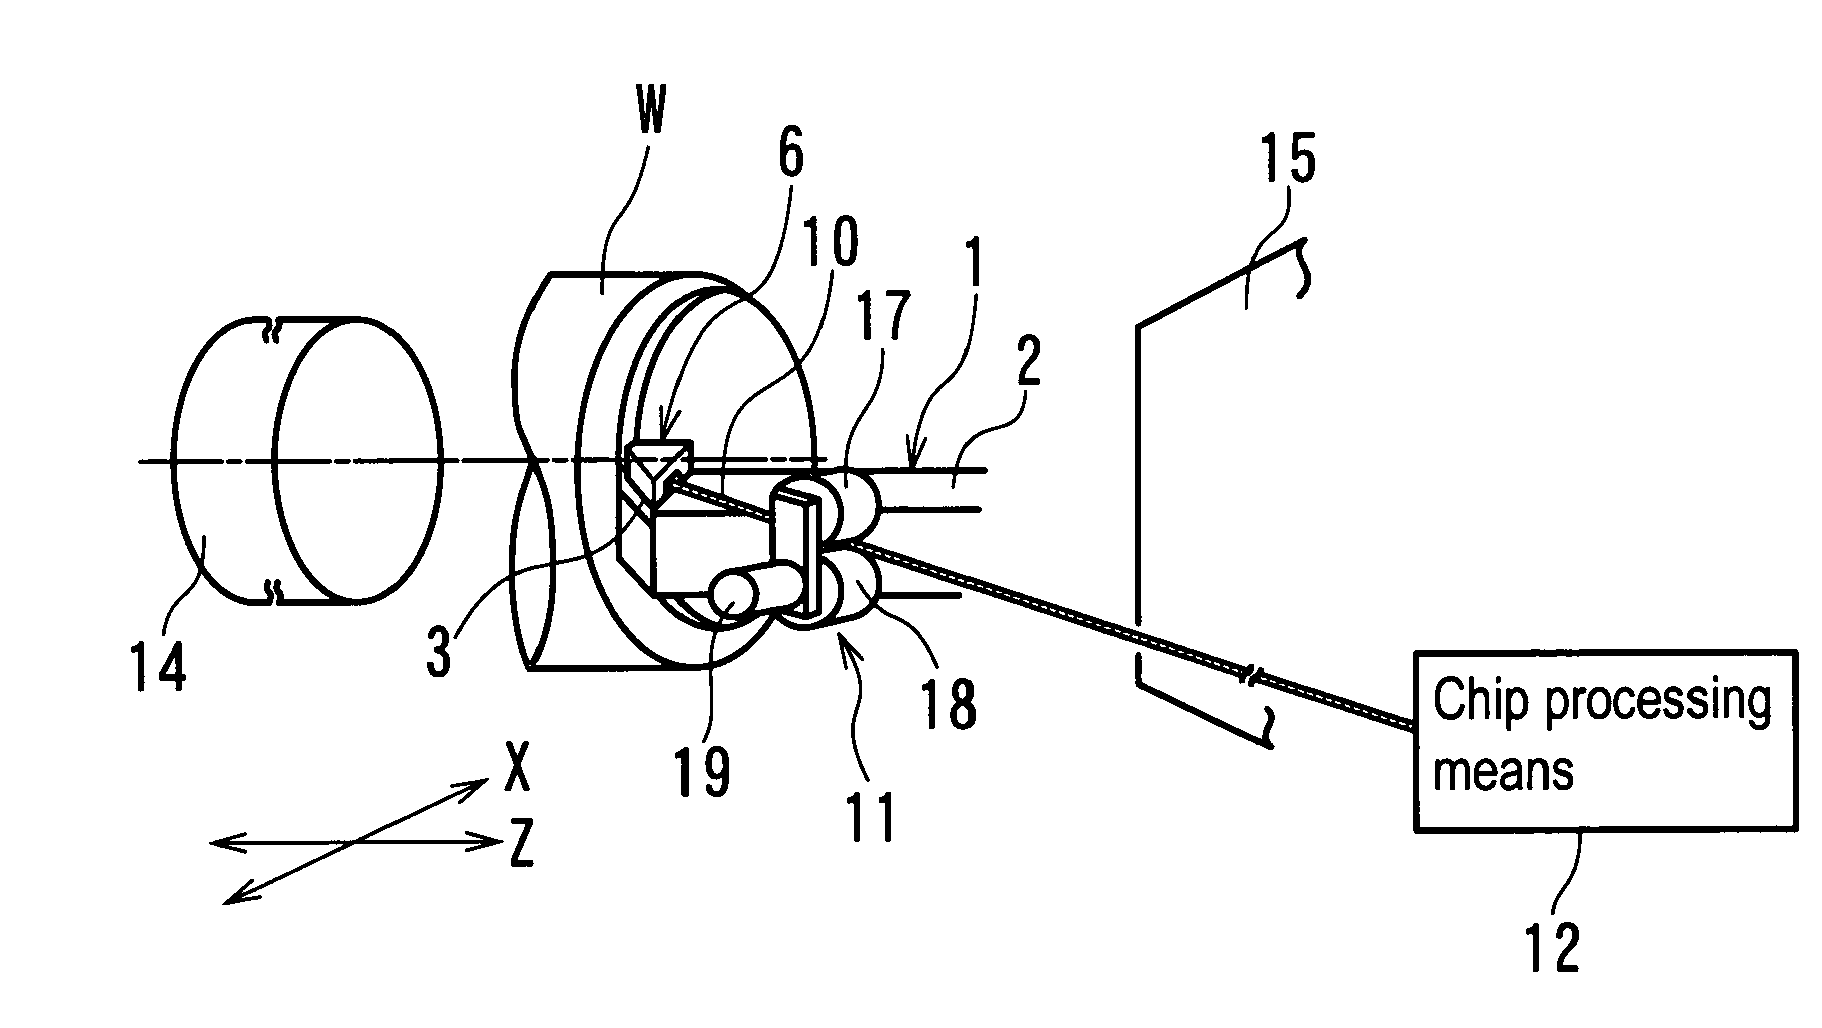 Machine tool with chip processing function